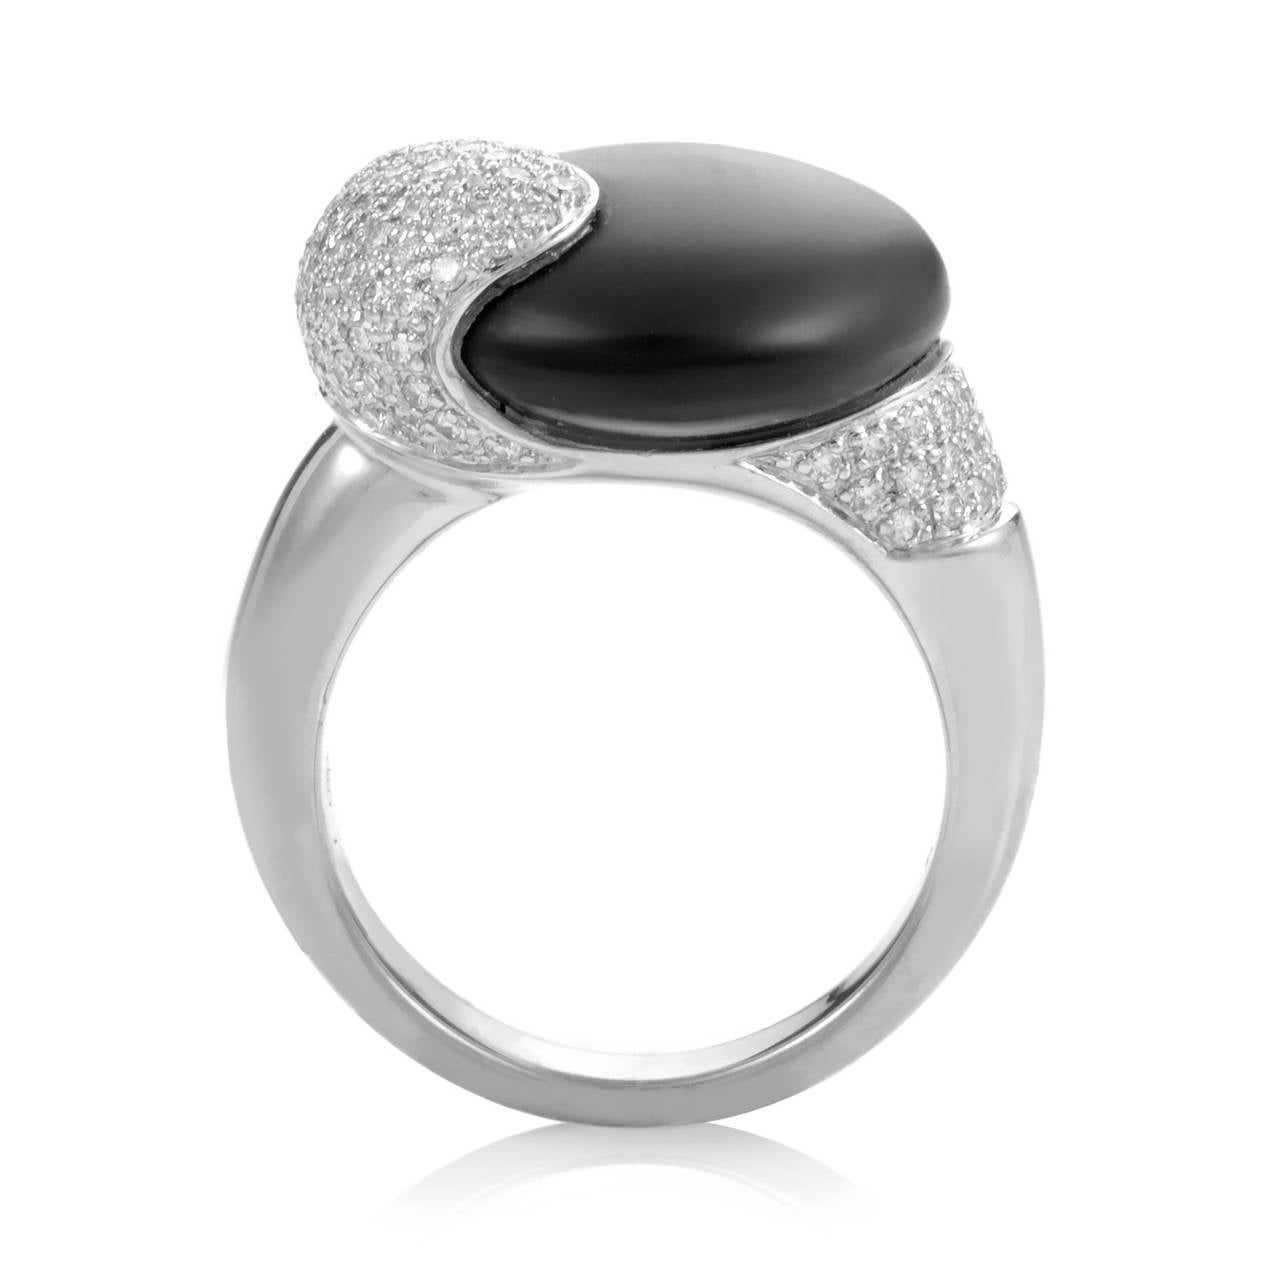 This lovely ring from Movado is quite unique due to the inclusion of different kinds of materials. The ring is made of 18K white gold and boasts shanks set with a partial pave of diamonds. Lastly, a smooth black stone adds a unique touch to the